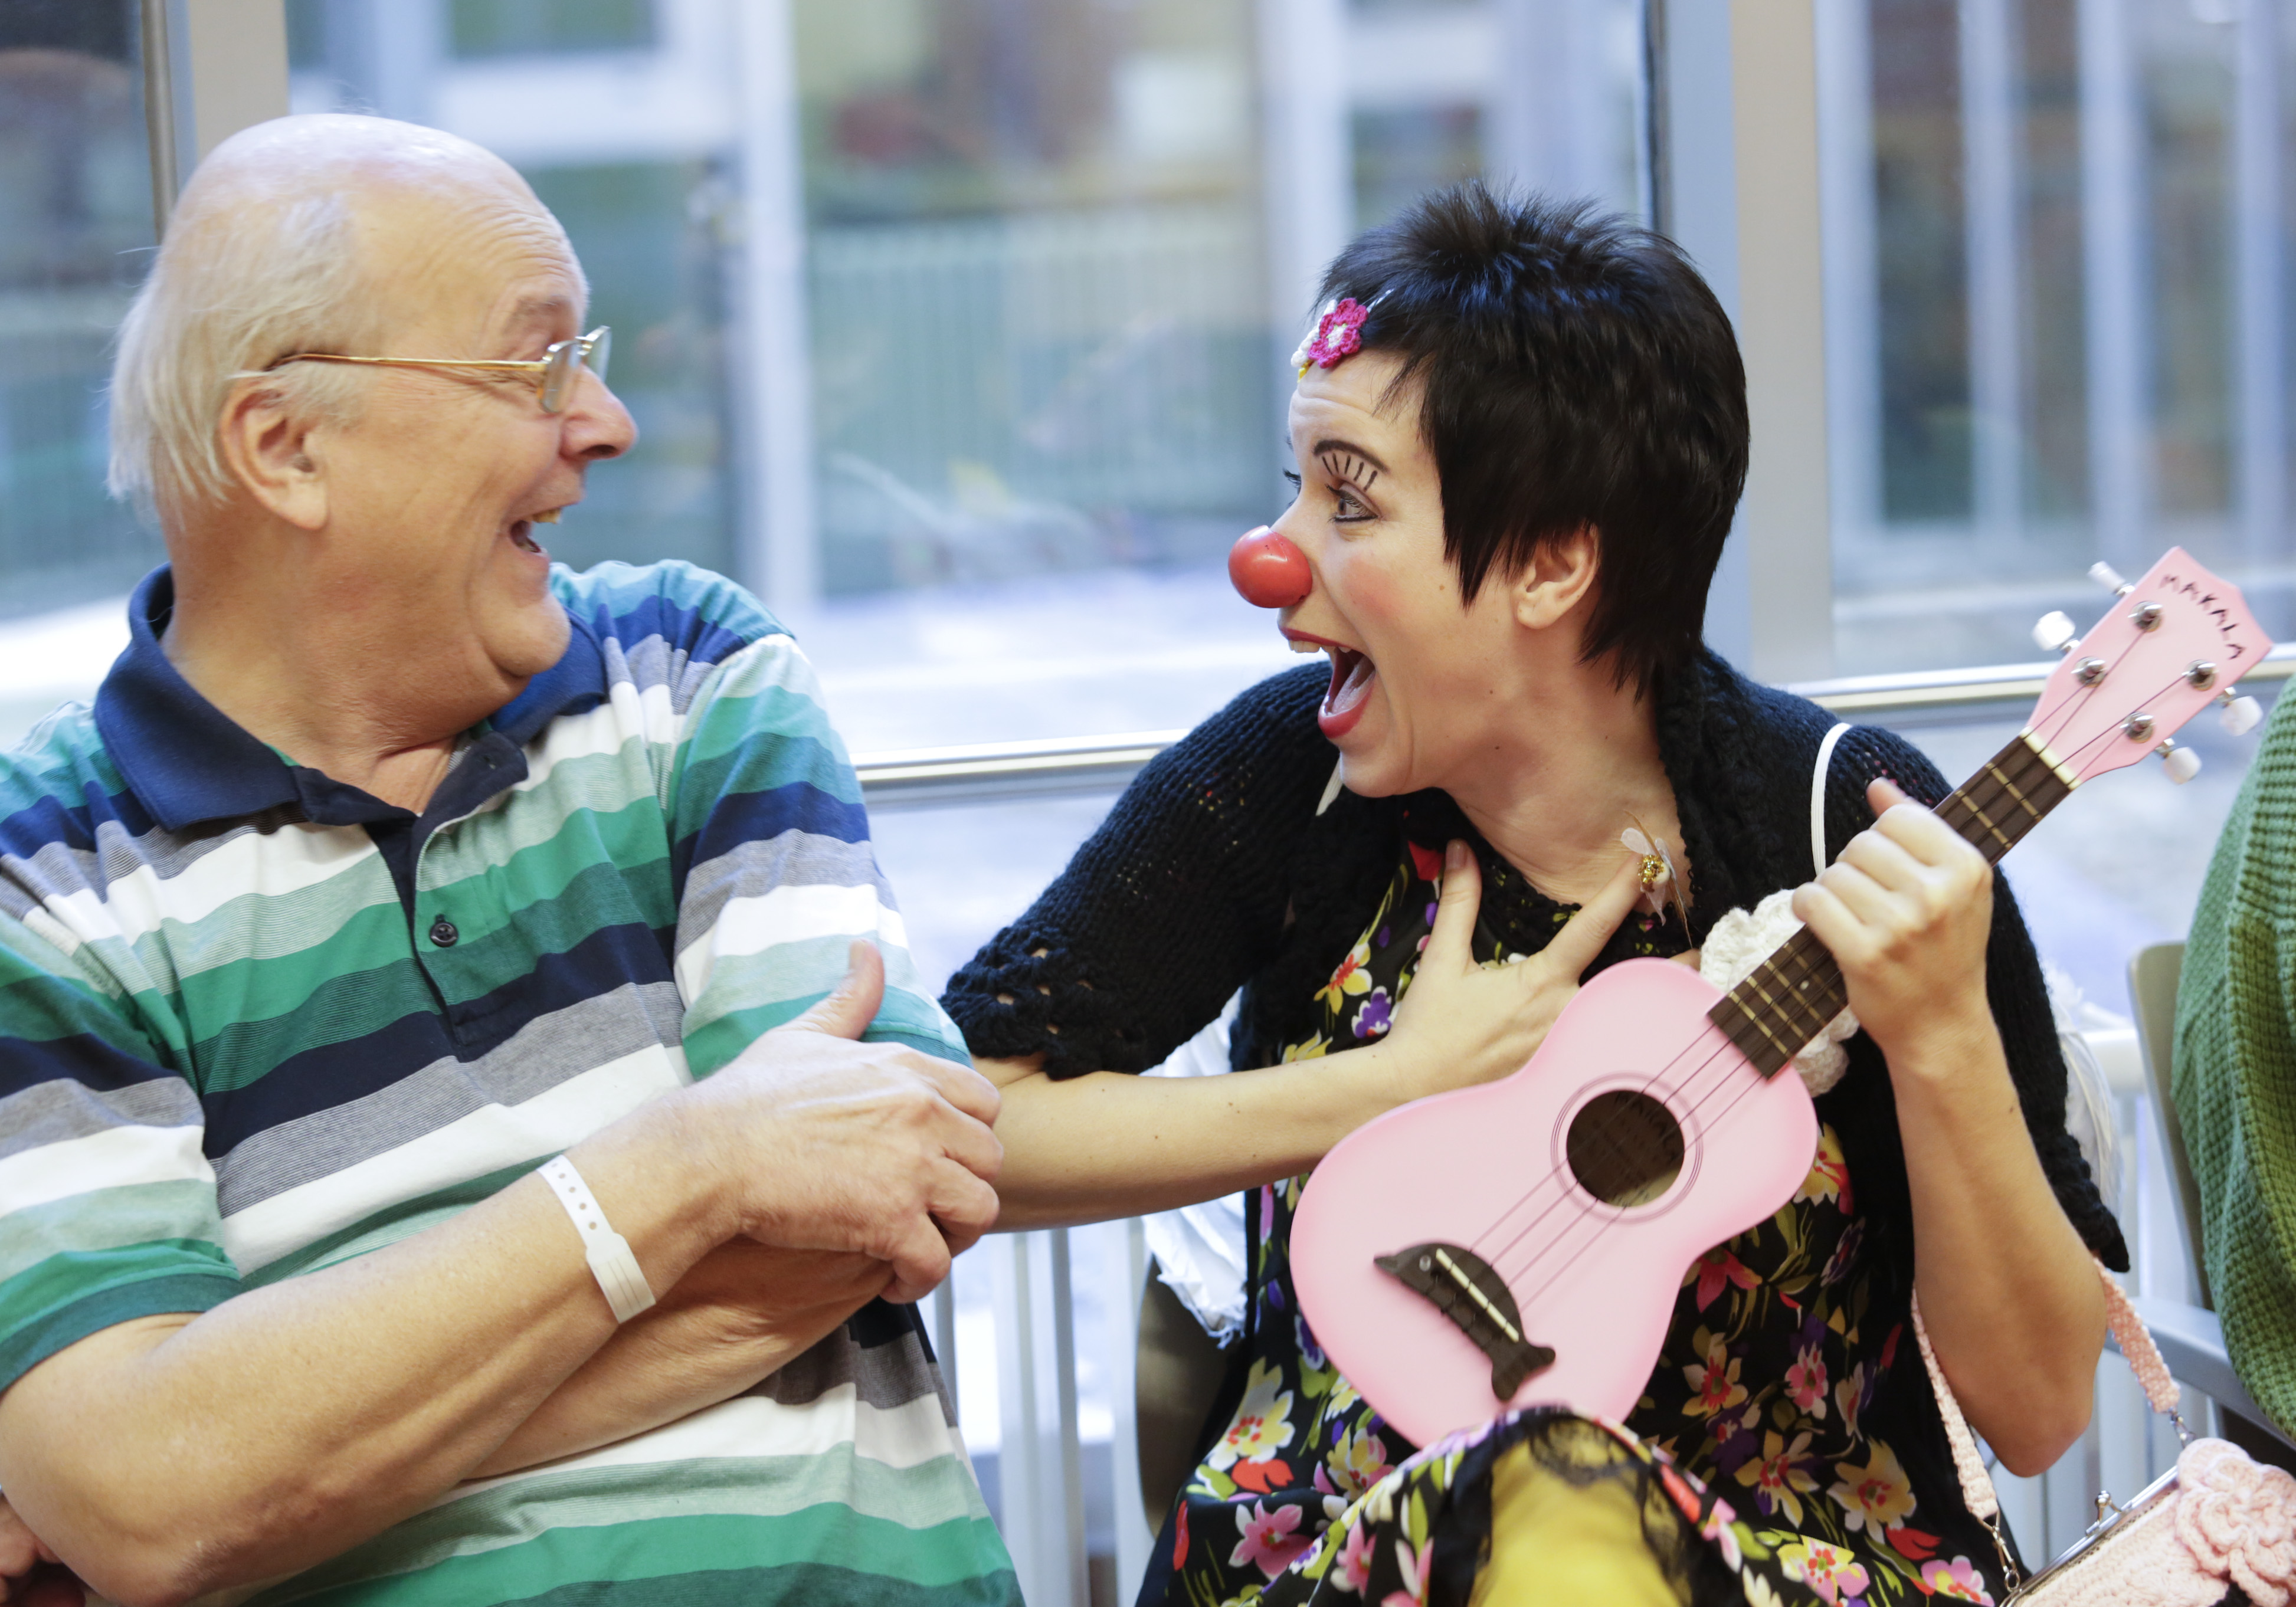 old man laughing with female clown holding guitar 